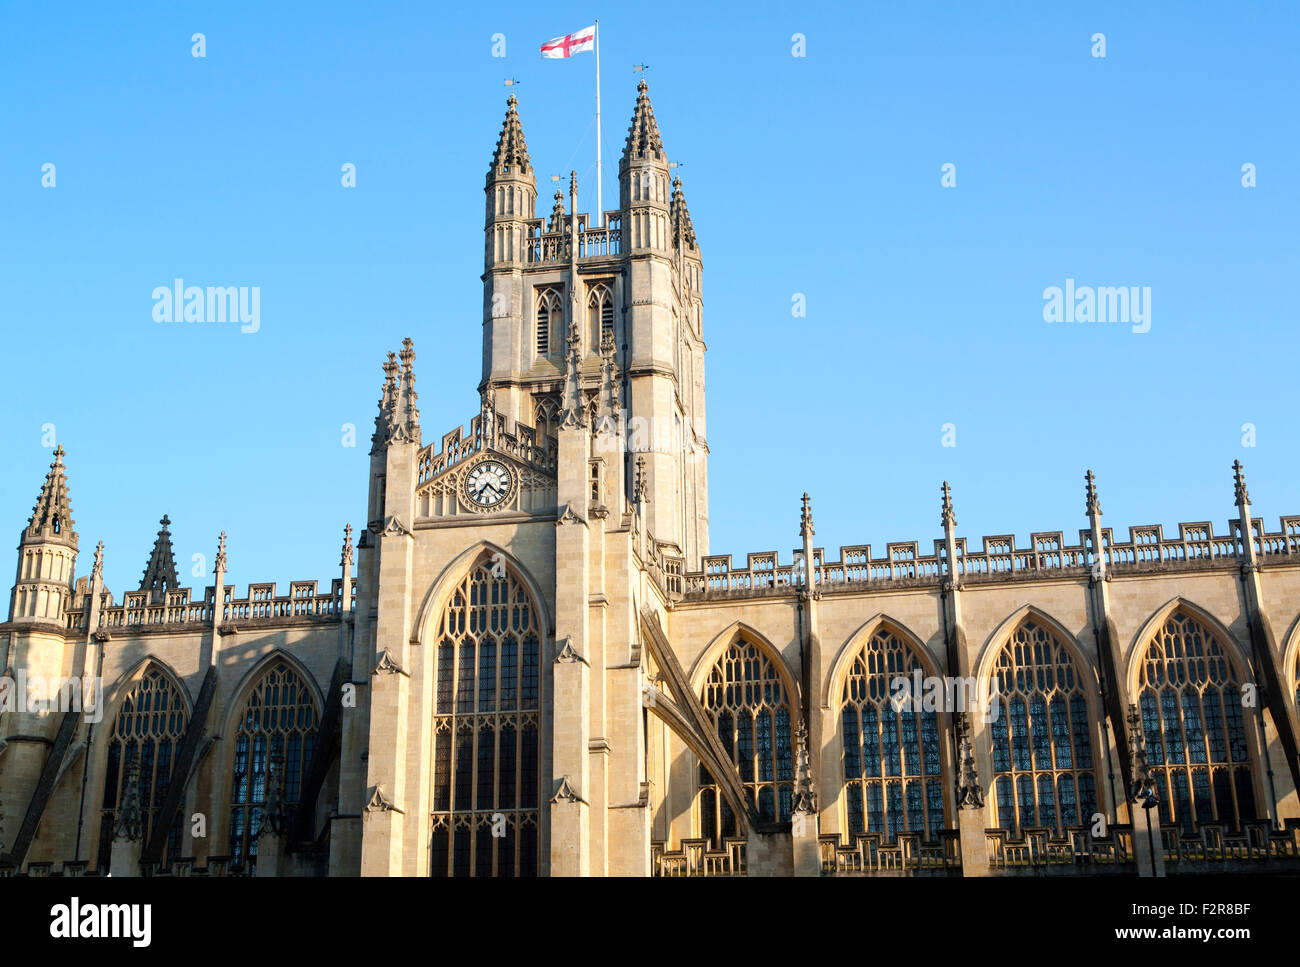 English flag flying on the tower of the Abbey church, Bath, Somerset, England, UK Stock Photo